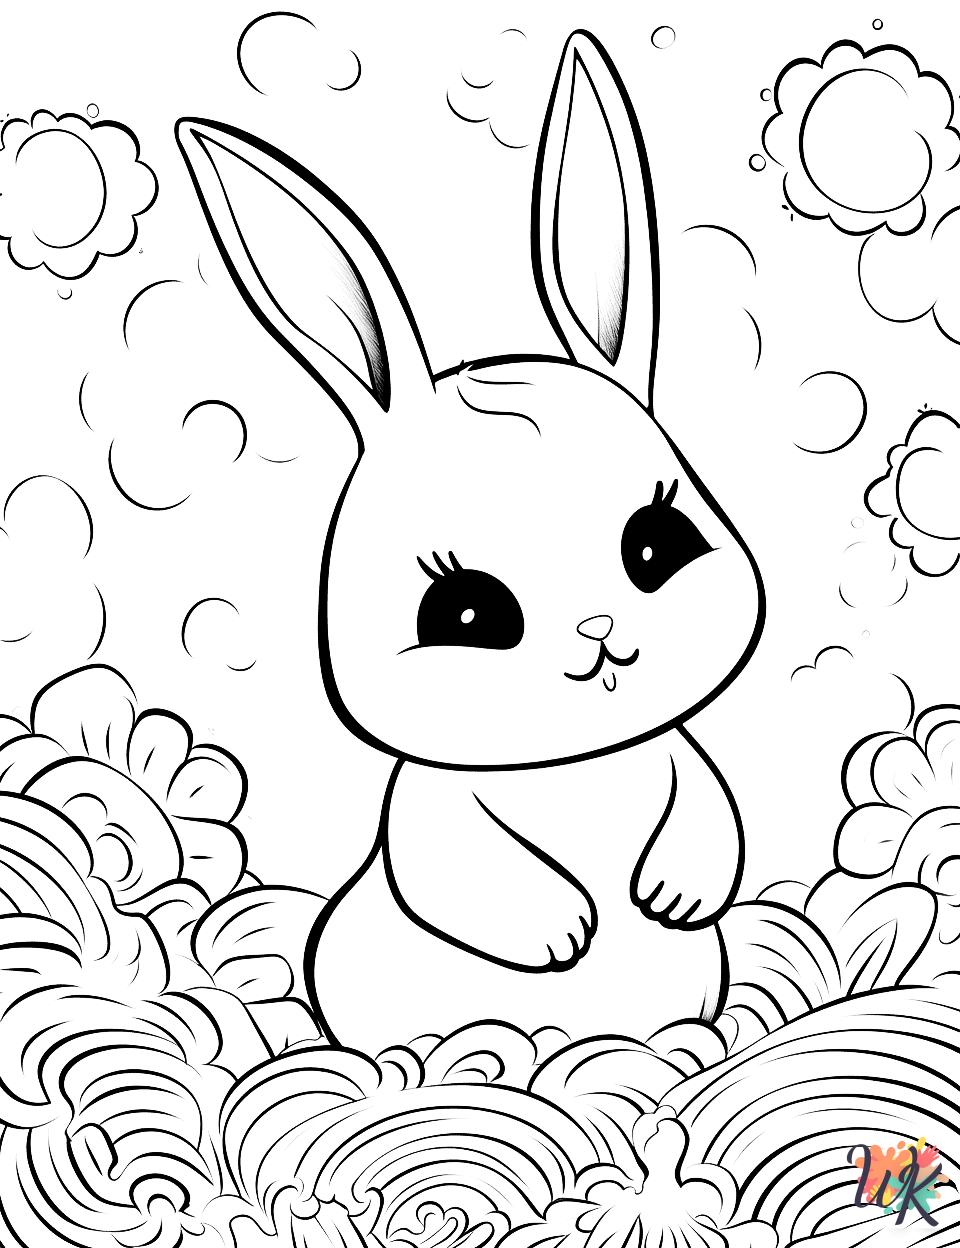 Rabbits ornaments coloring pages